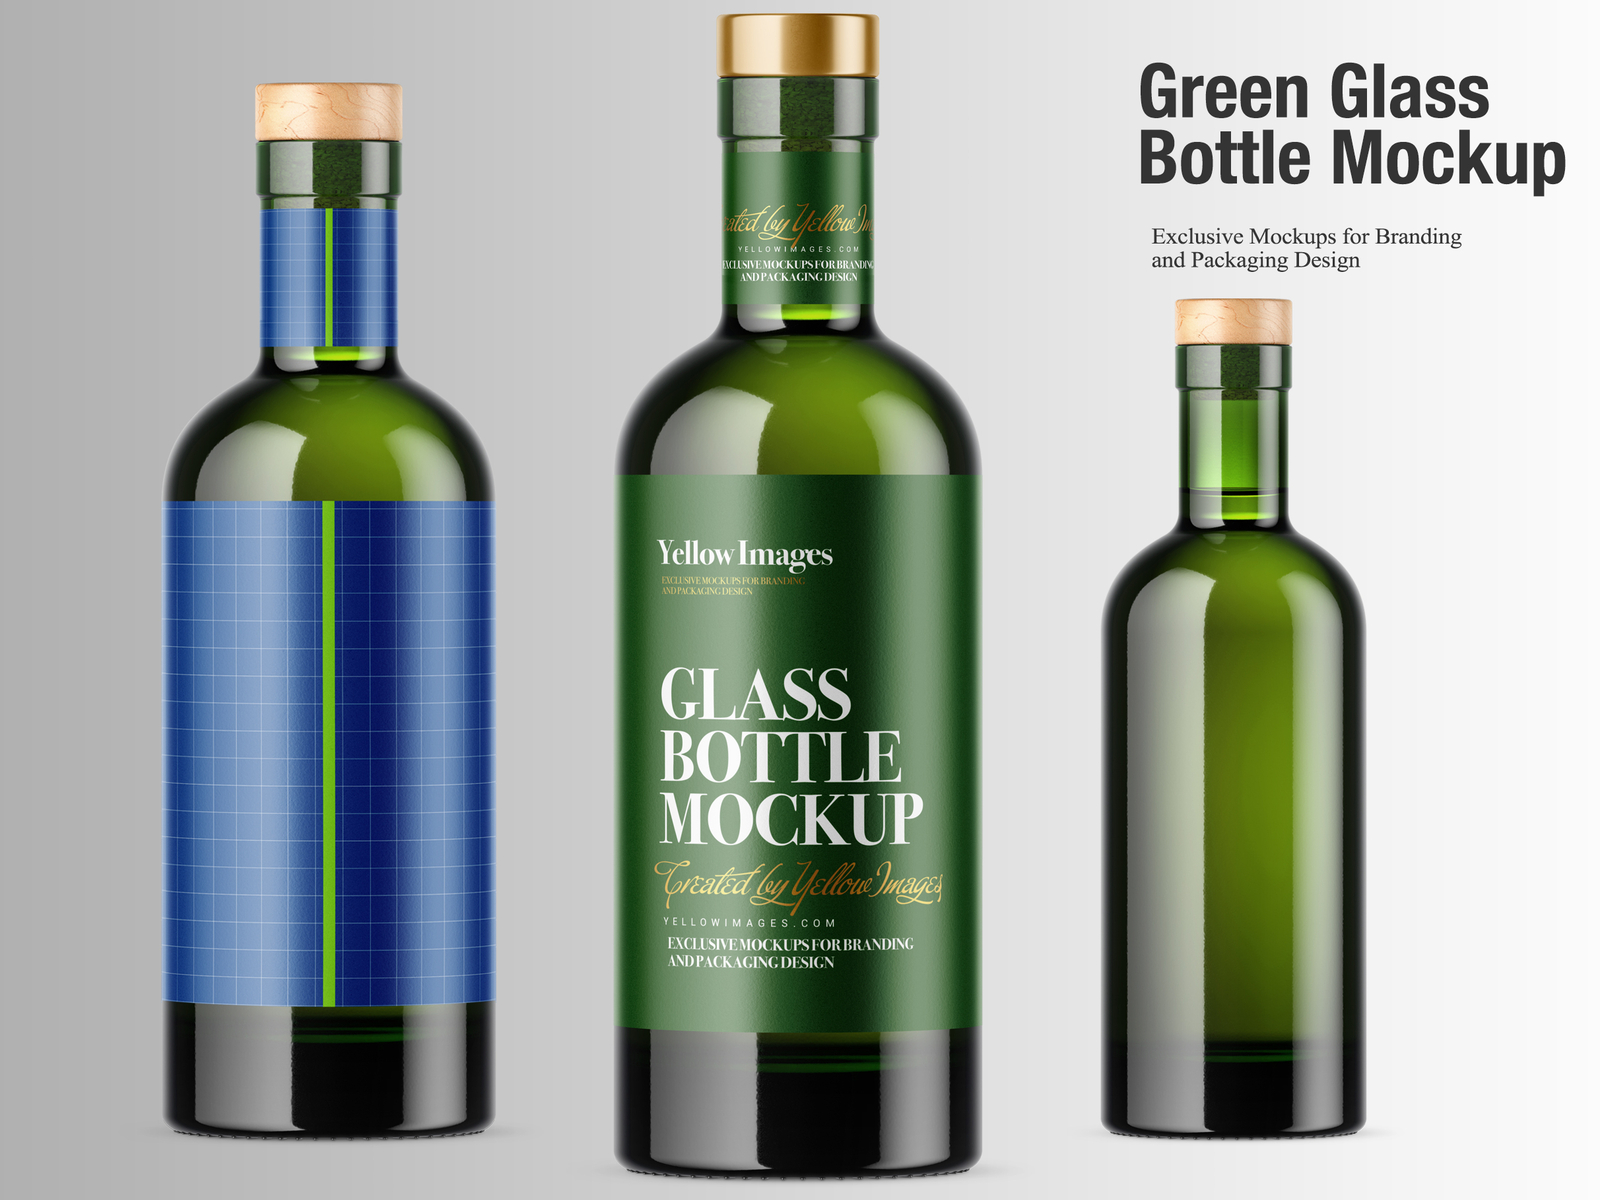 Wine Bottle Mockup Photoshop Download Free And Premium Quality Psd Mockup Templates